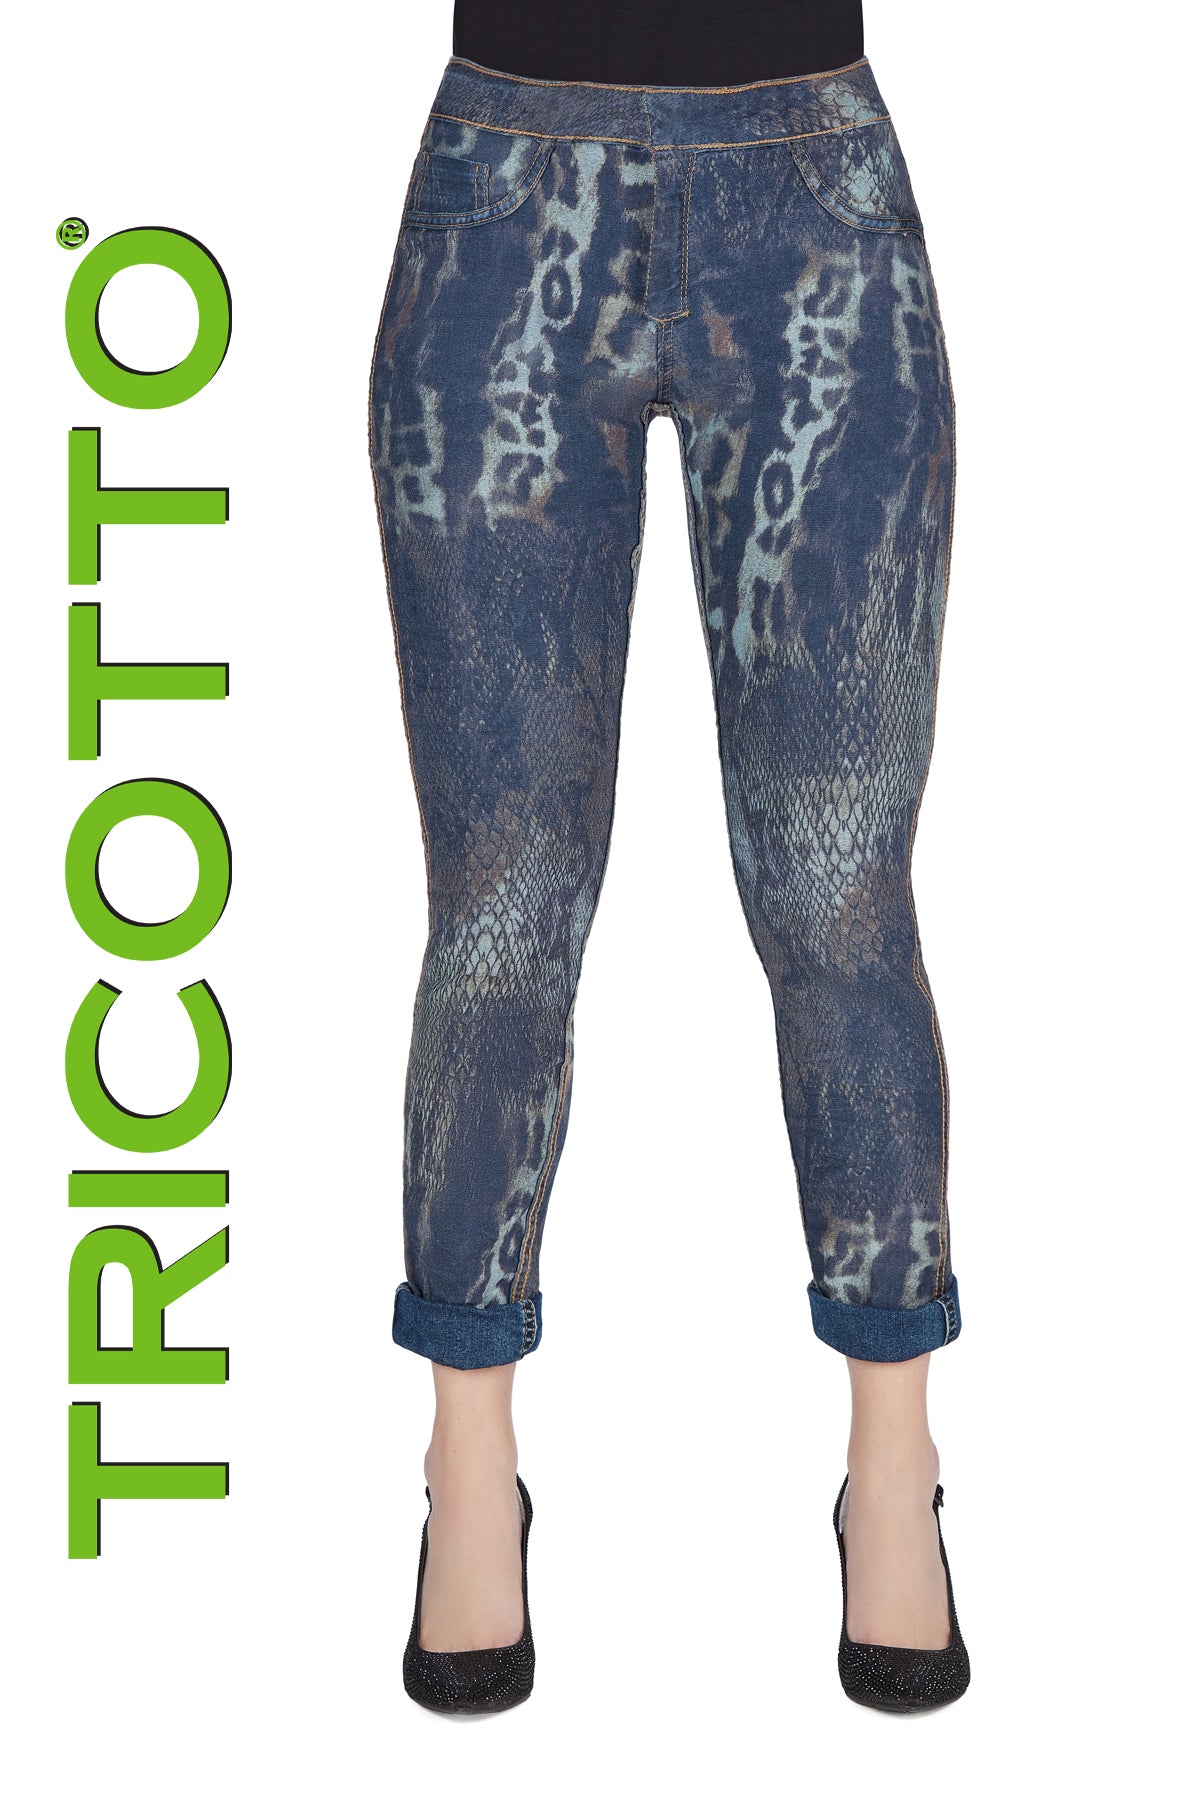 Tricotto Jeans-Tricotto Pants-Buy Tricotto Jeans Online-Tricotto Clothing Montreal-Tricotto Online Shop-Women's Jeans Online